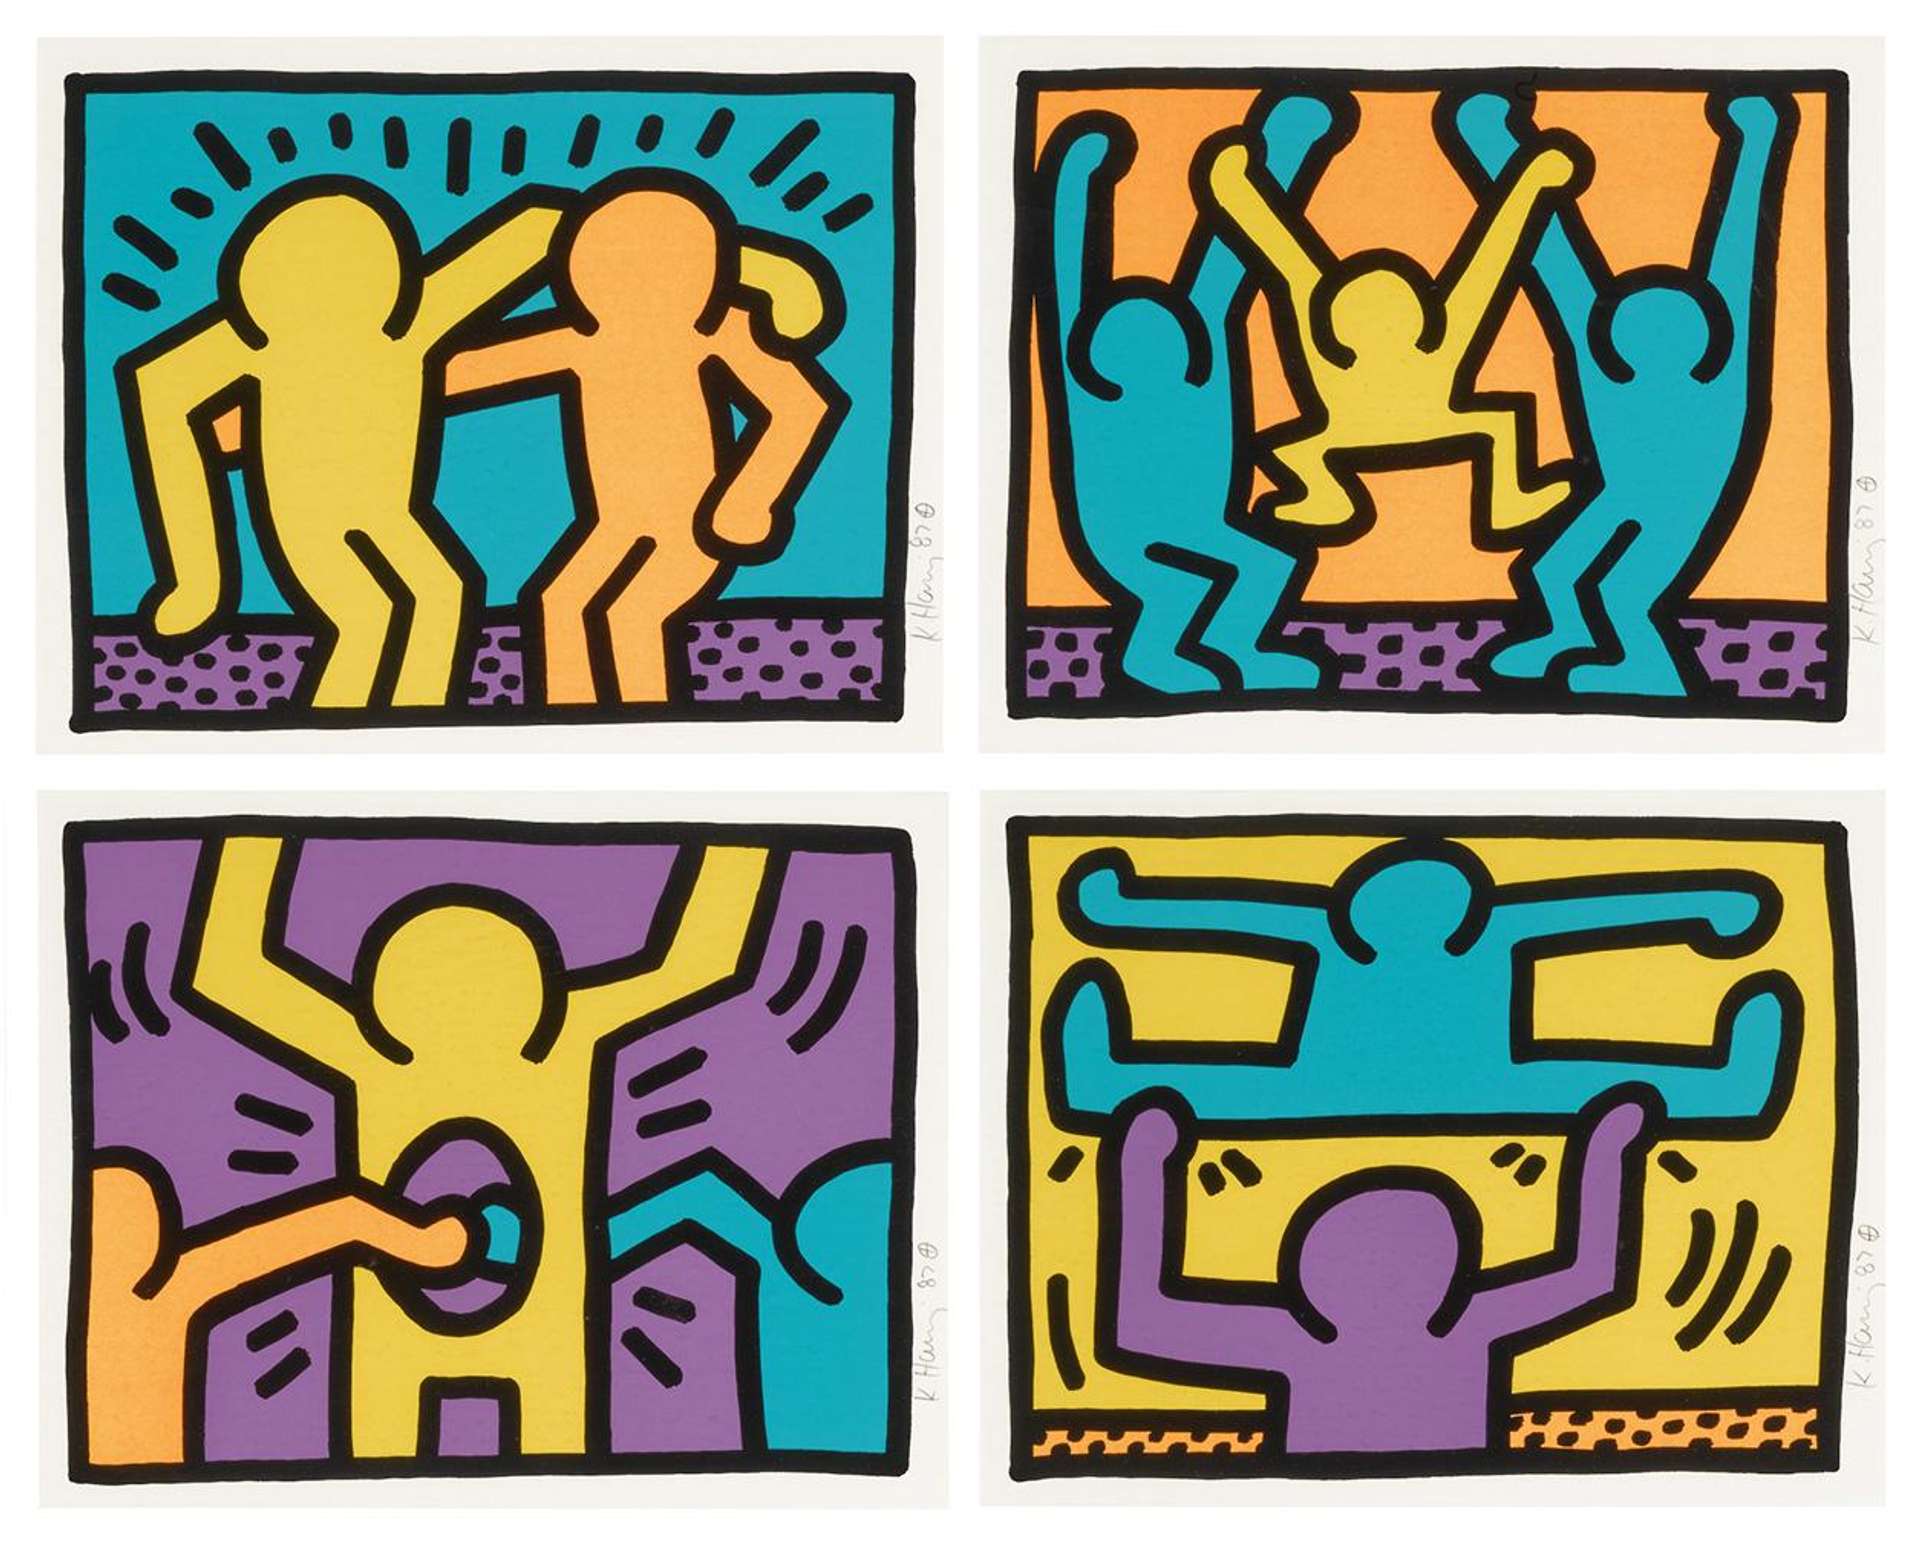 The artwork is a complete set of signed prints from Keith Haring's Pop Shop I collection. The collection consists of eight vibrant, colorful prints featuring Haring's signature cartoon-like figures in a variety of playful and dynamic compositions. Each print is bordered by a thick black line and features bold, solid blocks of color in shades of red, blue, yellow, and green. 